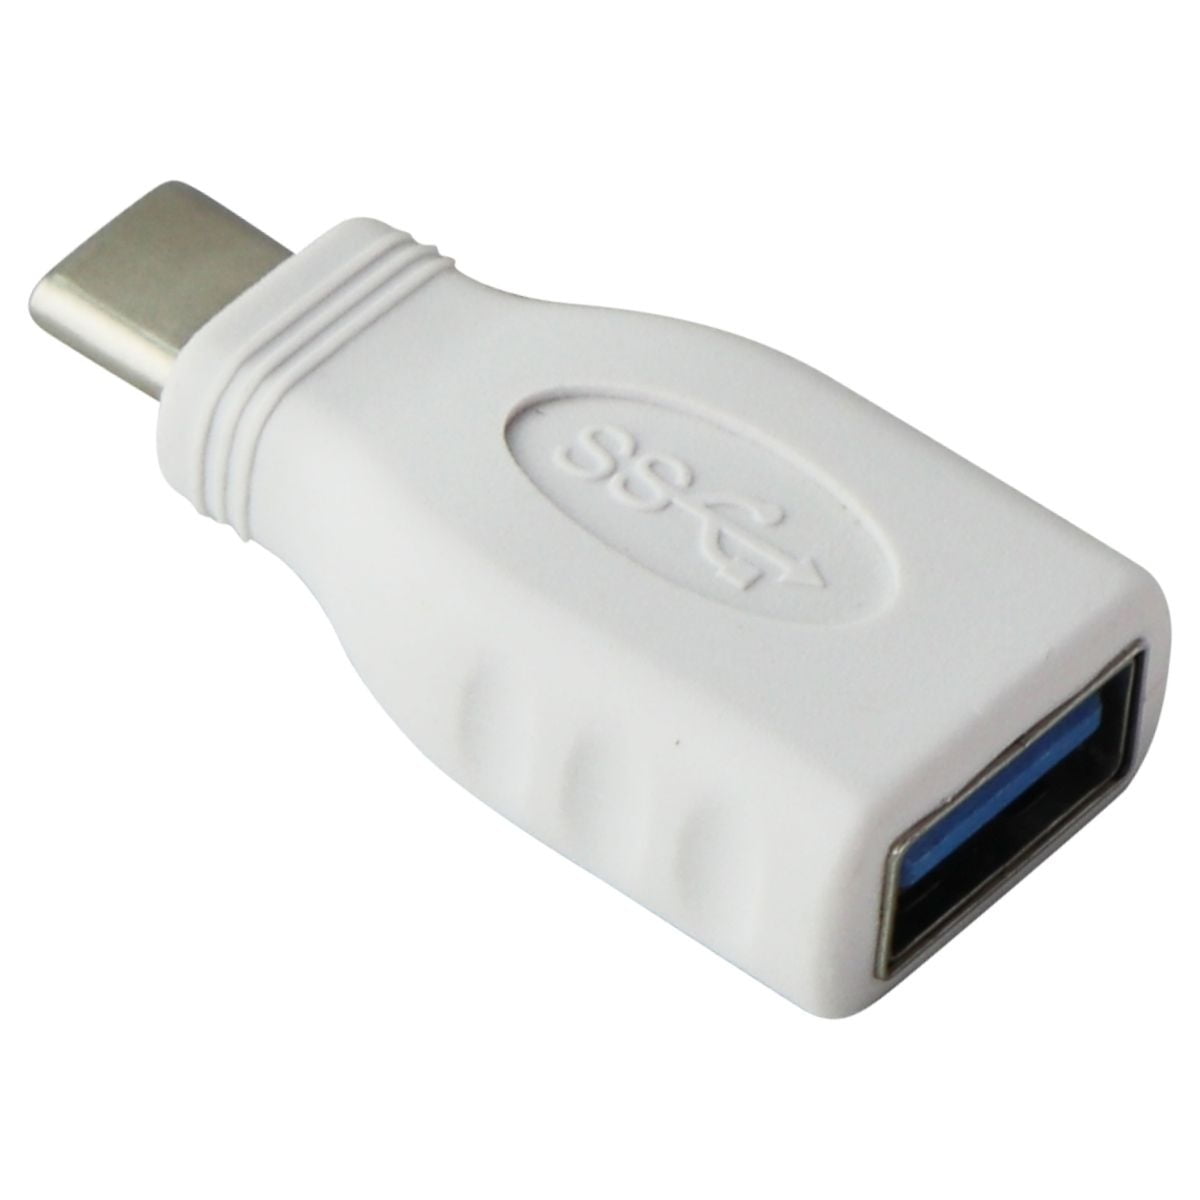 Restored 3.0 to USB-C SS Adapter from Google Titan Security Key - White (Refurbished) - Walmart.com